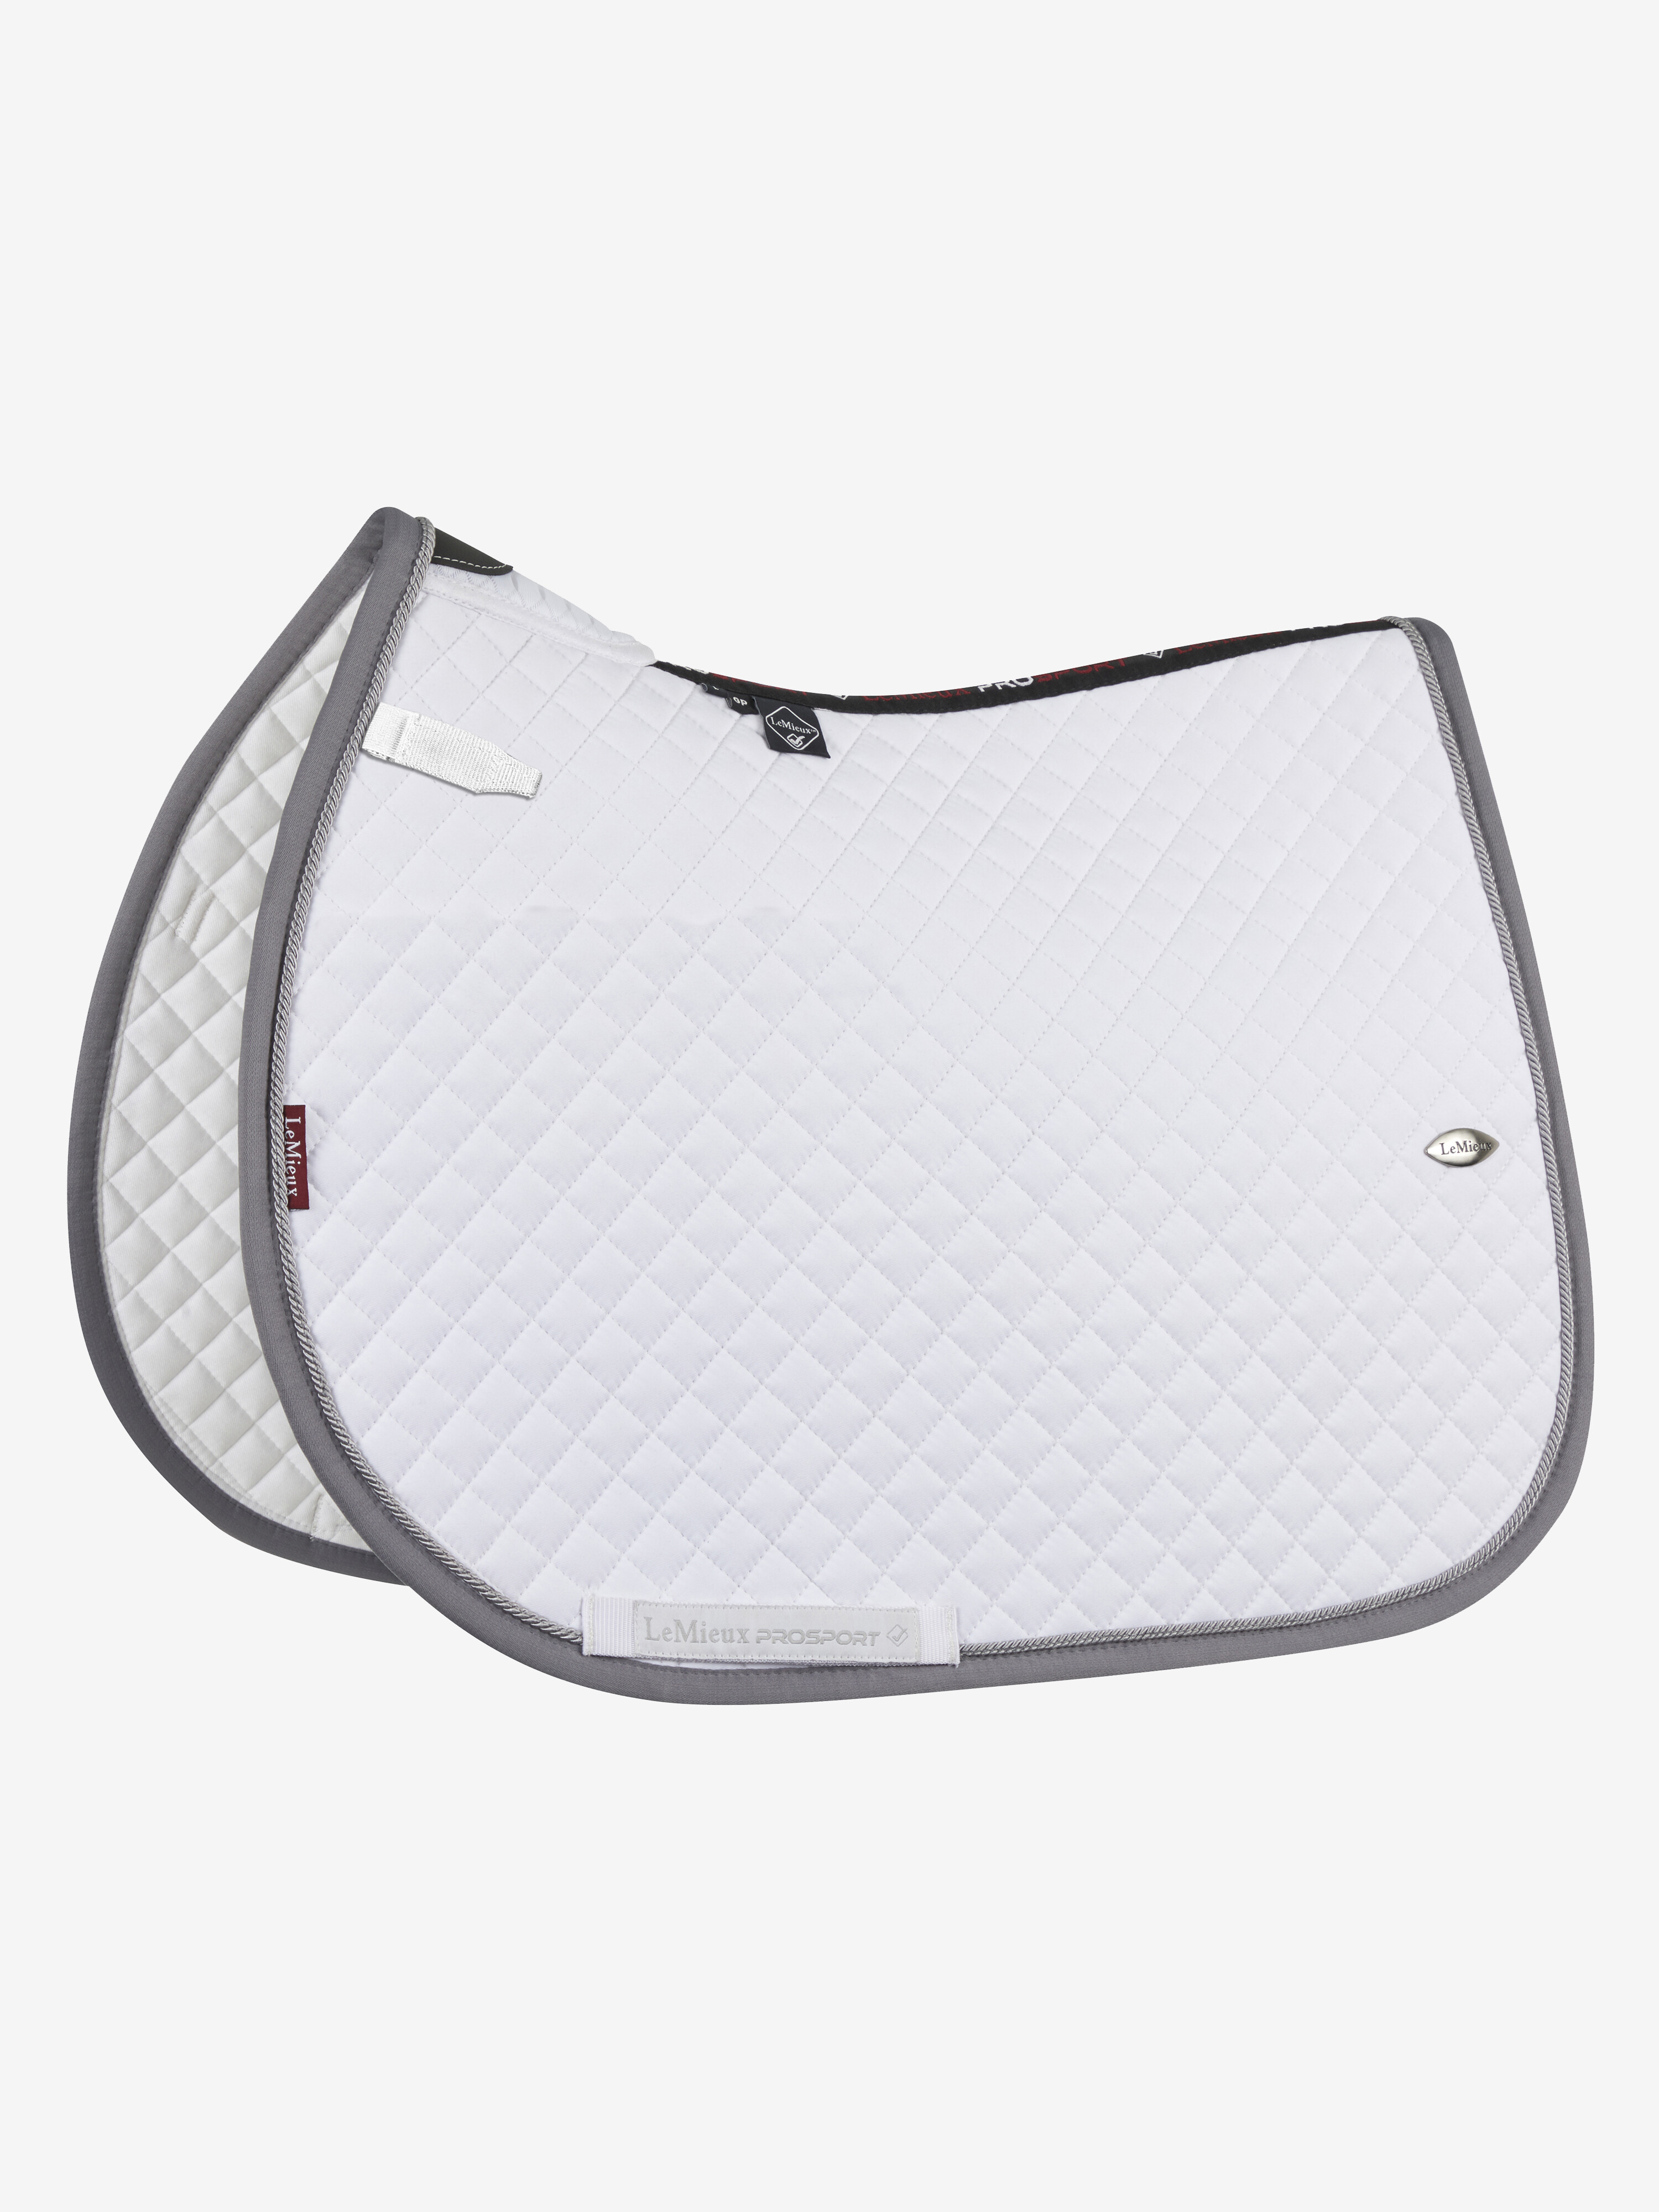 Wither Relief Jump Pad White Saddle Pads